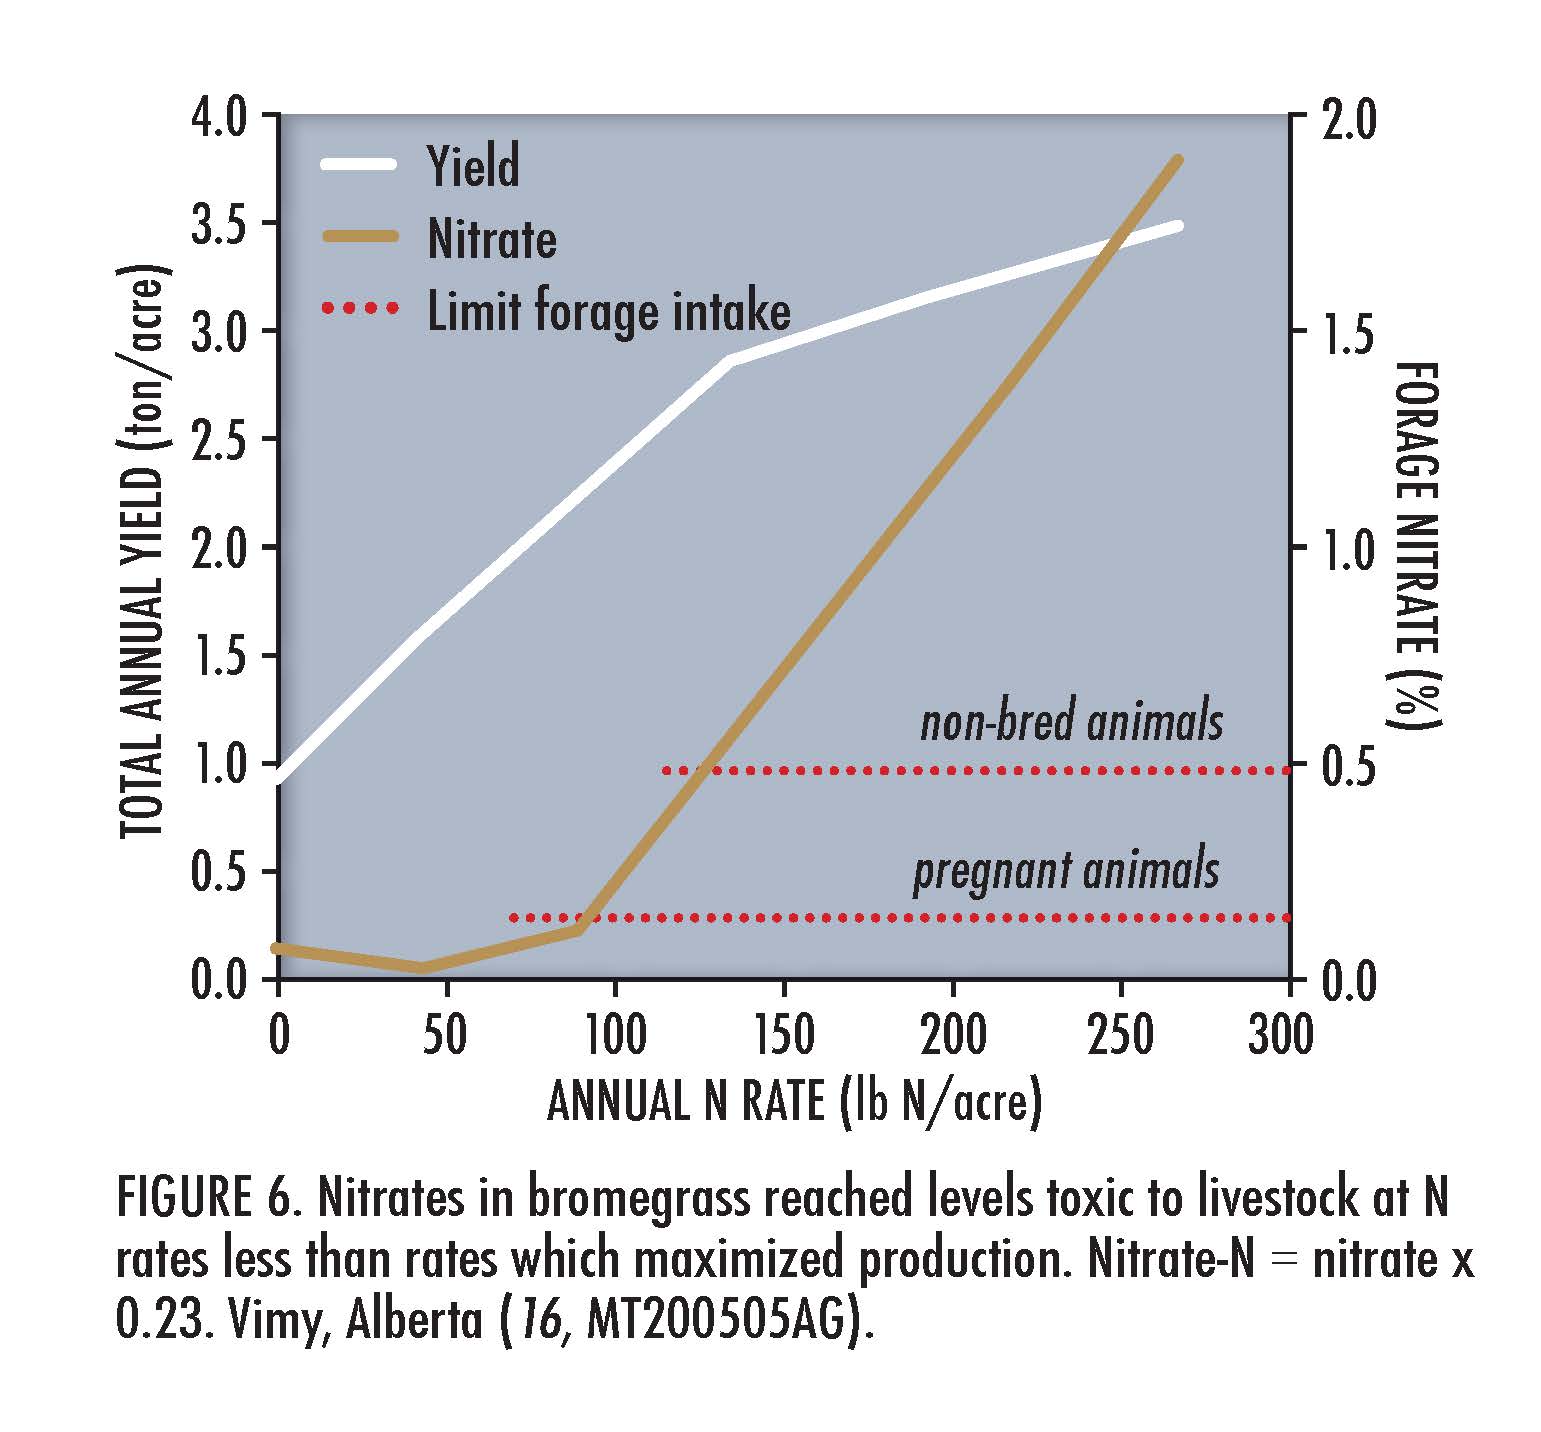 Figure 6. Nitrates in bromegrass reached evels toxic to livestock at N rates less than rates which maximized production. Nitrate-N= nitrate x 0.23. Vimy, ALberta (16, MT200505AG)